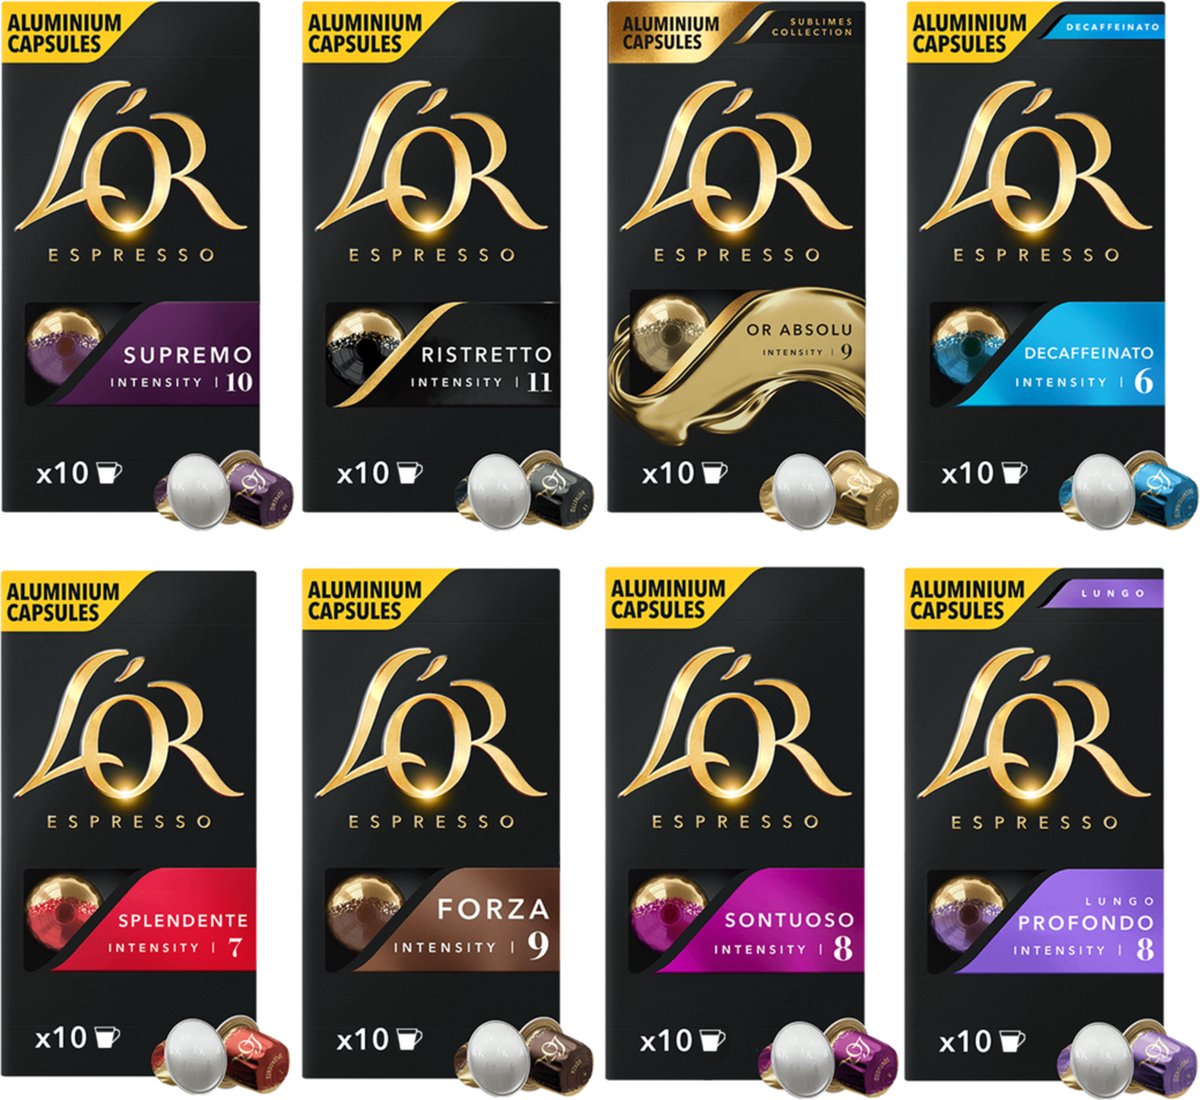 L'OR Espresso Capsules, 50 Count Variety Pack, Single-Serve